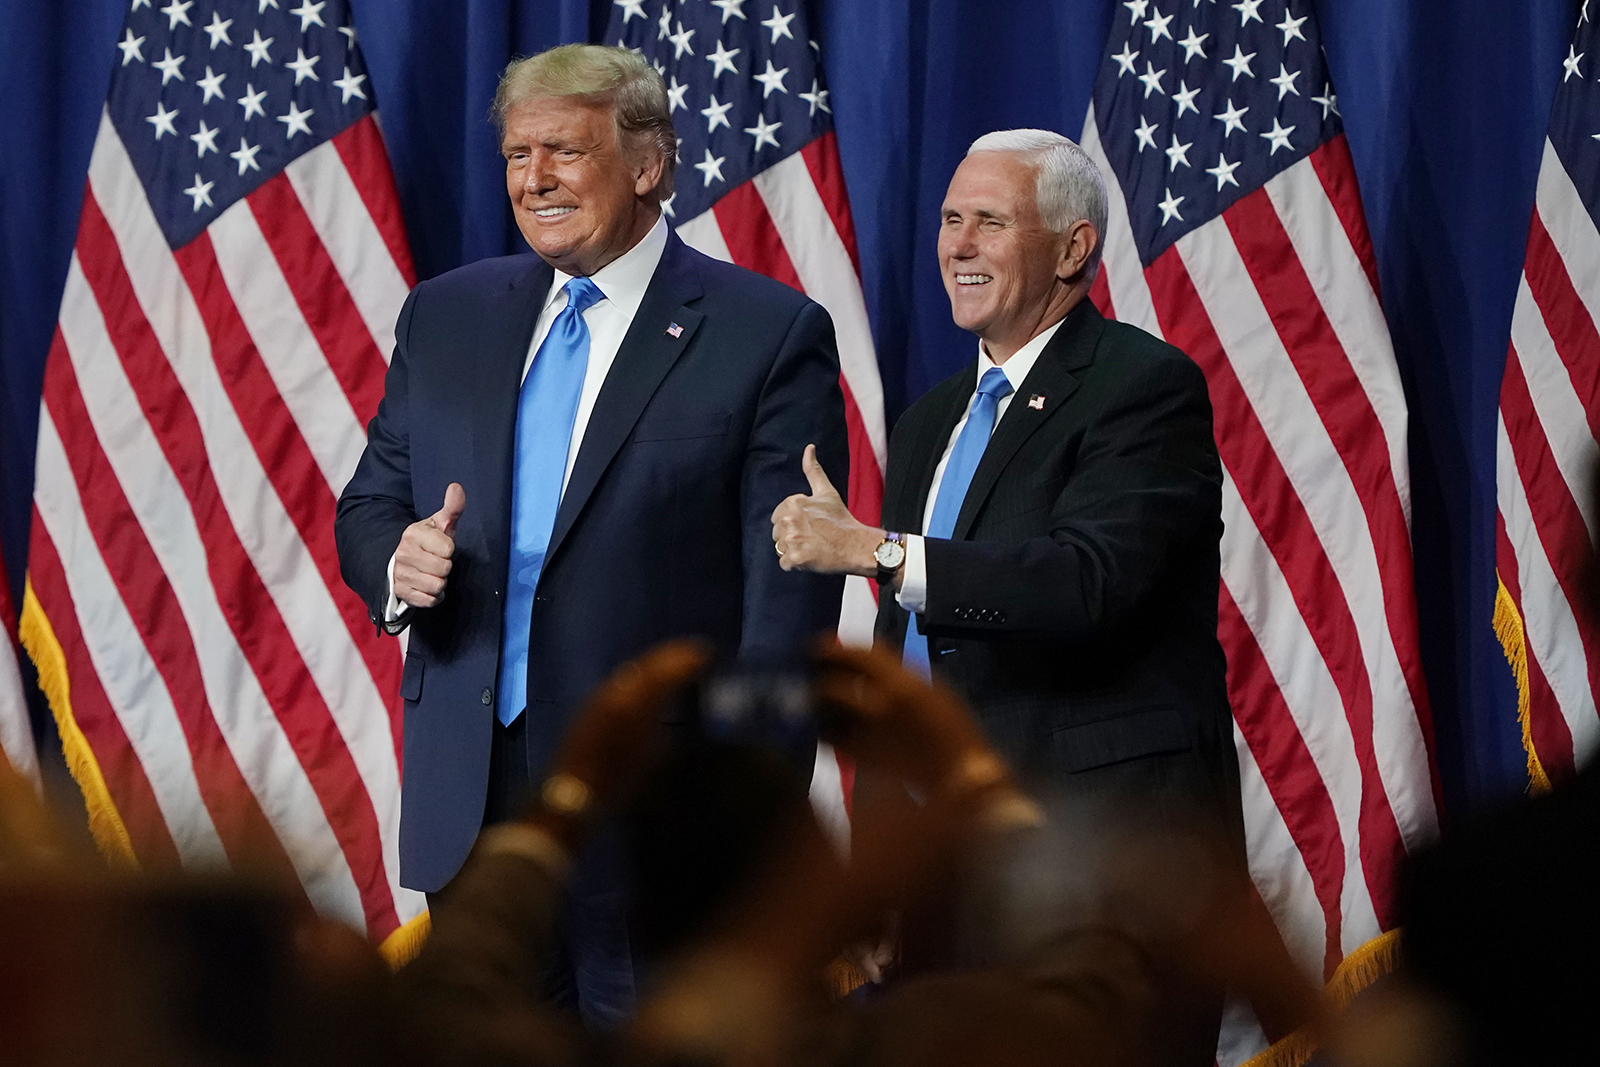 President Donald Trump and Vice President Mike Pence give a thumbs up after speaking during the first day of the Republican National Convention Monday, August 24 in Charlotte, North Carolina.